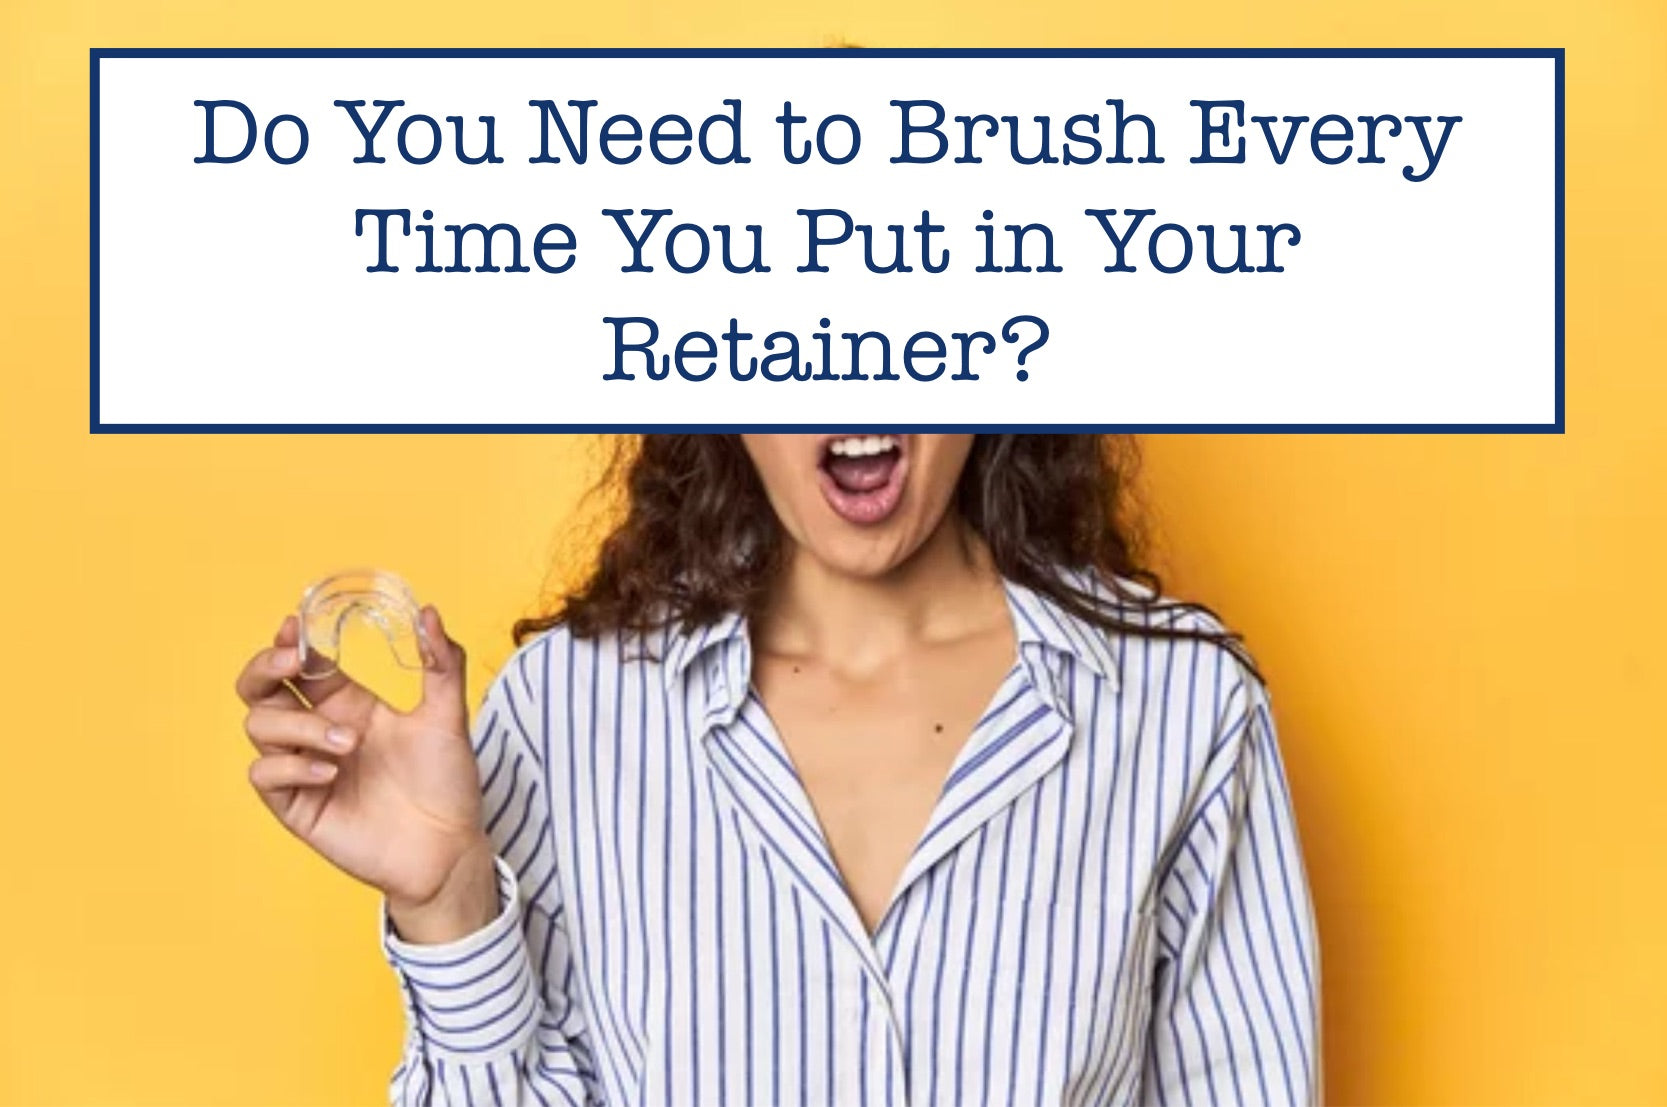 Do You Need to Brush Every Time You Put in Your Retainer?